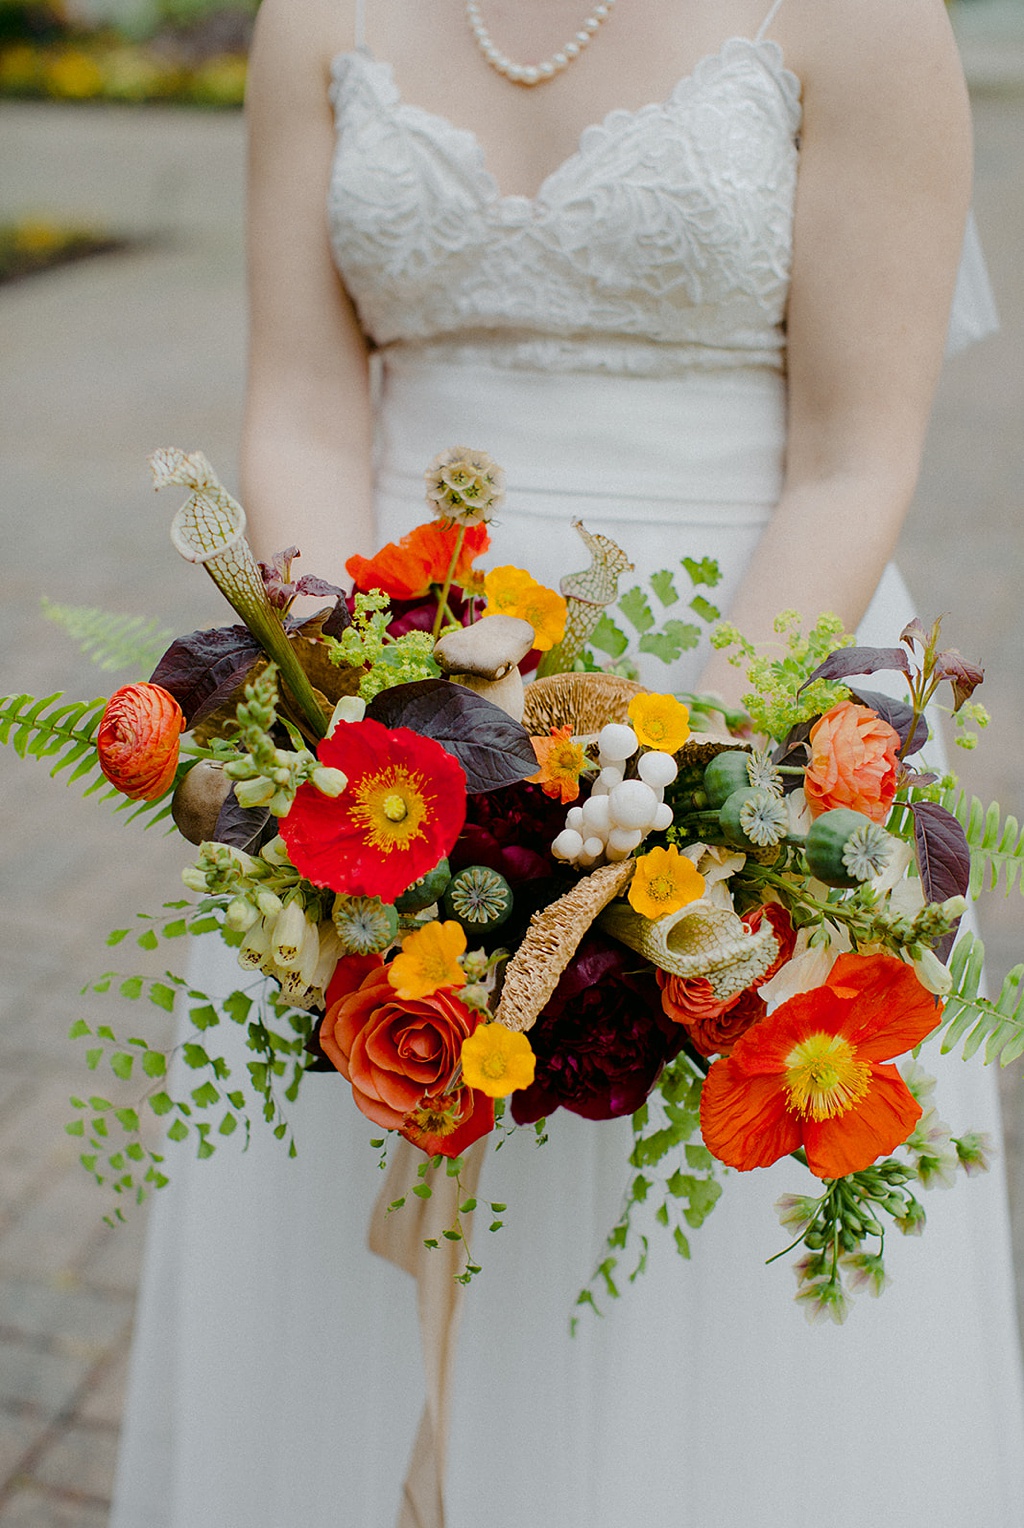 A Kiana Lodge wedding bridal bouquet with bright flowers and mushrooms